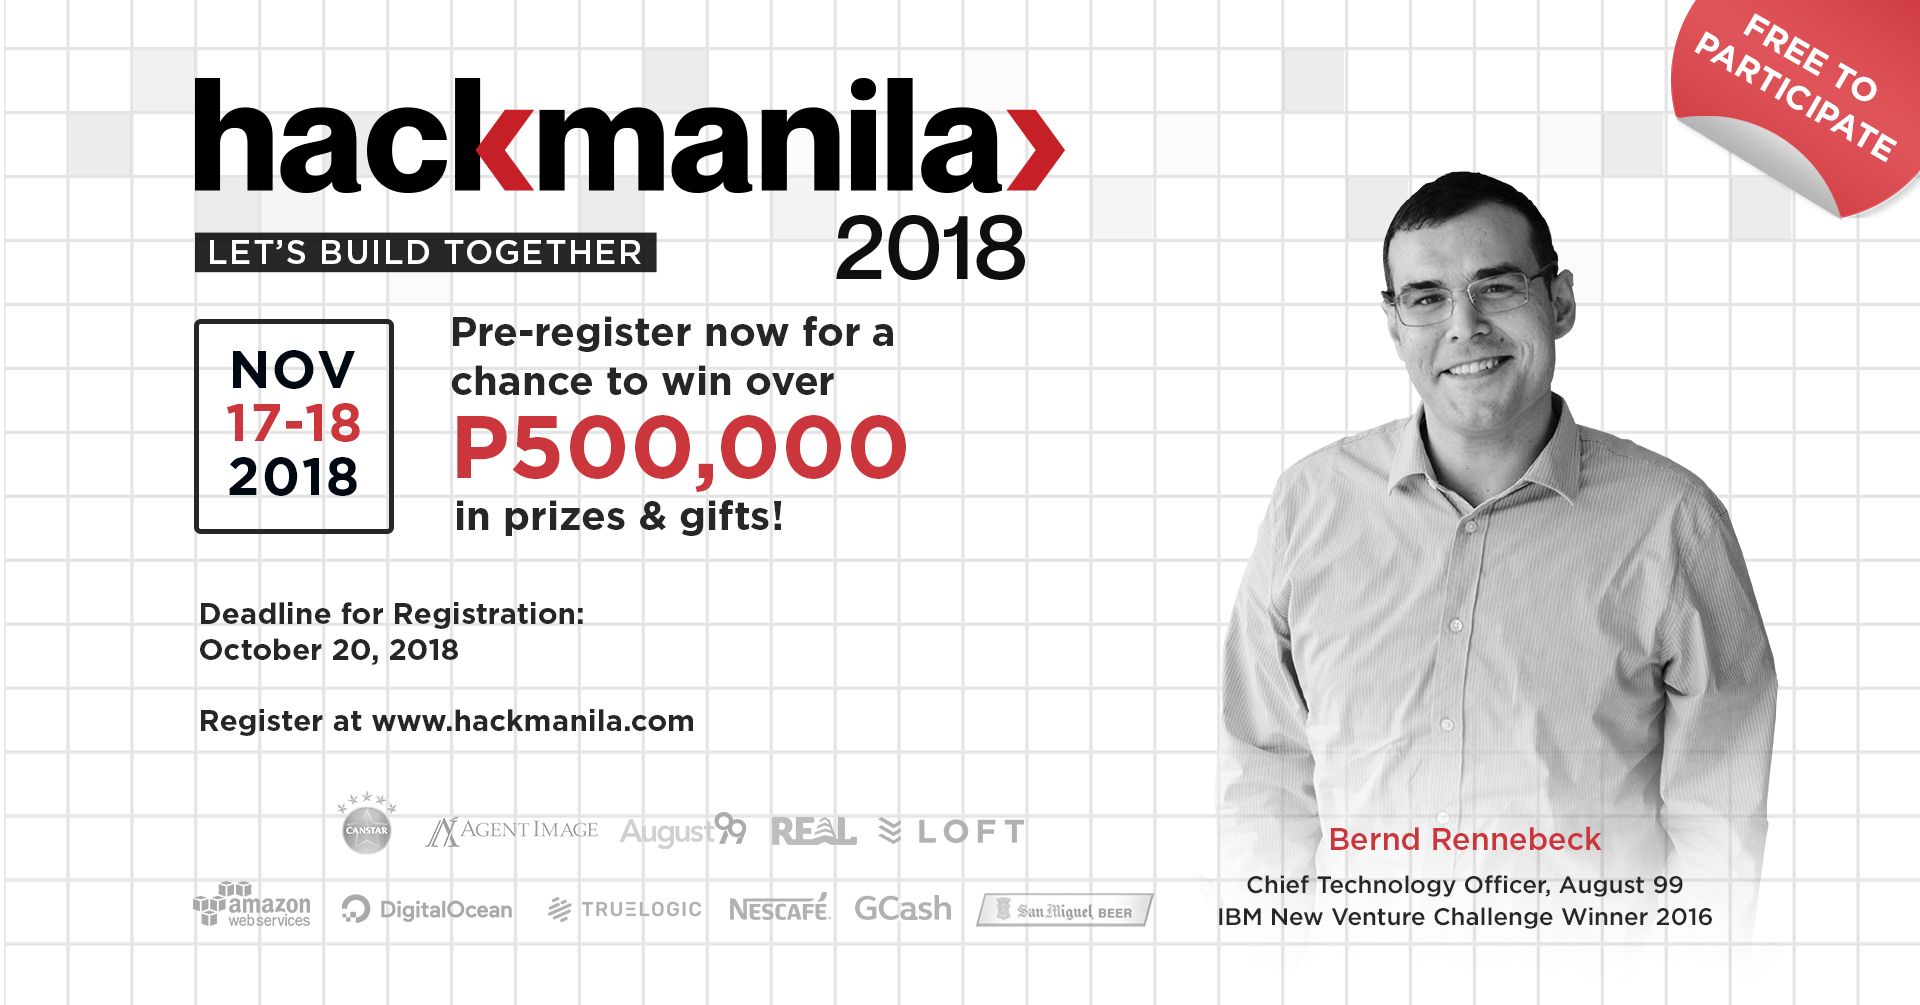 Calling All Developers: Hack Manila 2018 Hackathon is On!